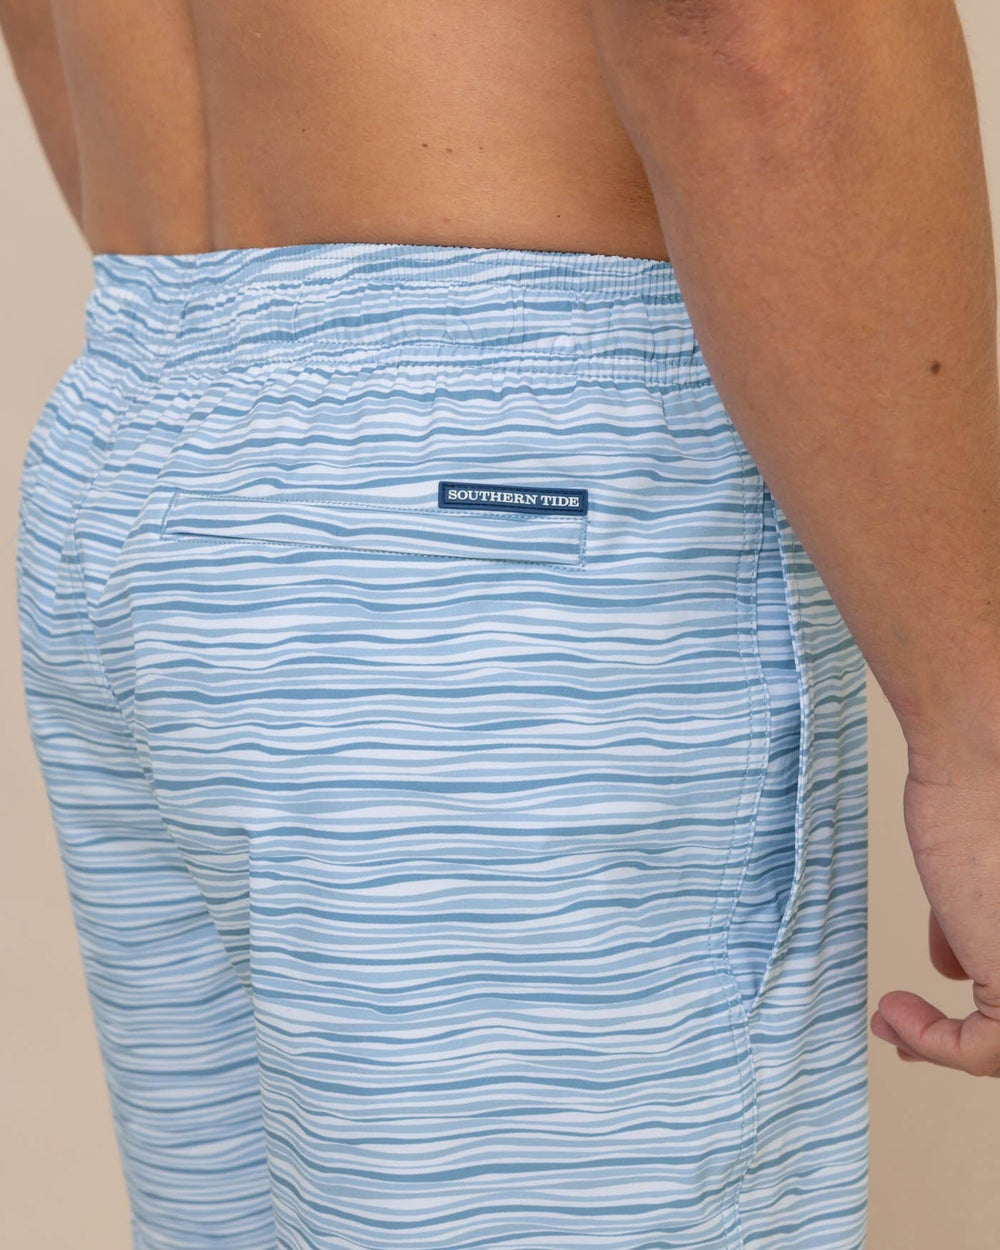 The detail view of the Southern Tide Ocean Water Stripe Swim Trunk by Southern Tide - Subdued Blue